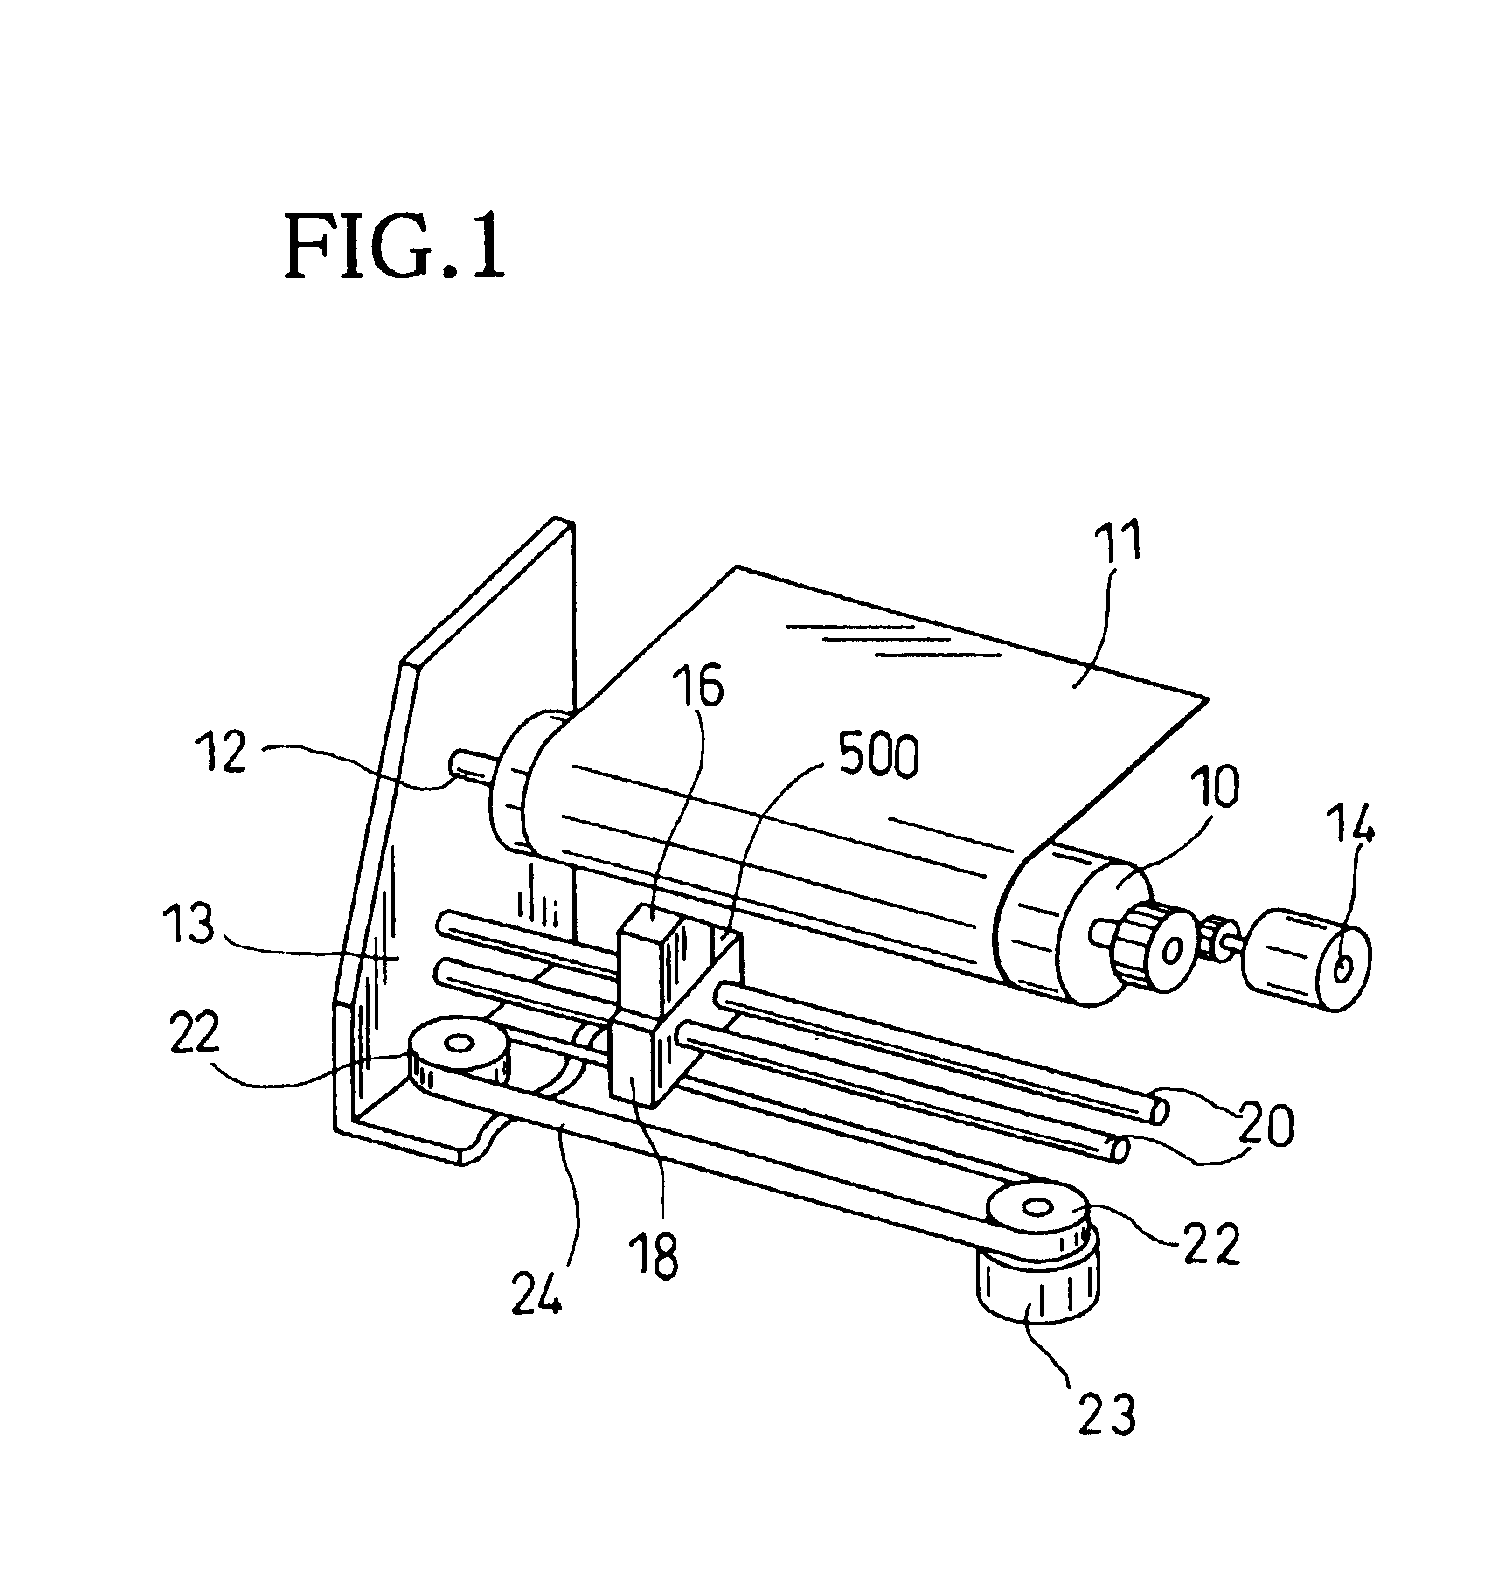 Method of manufacturing the piezoelectric transducer